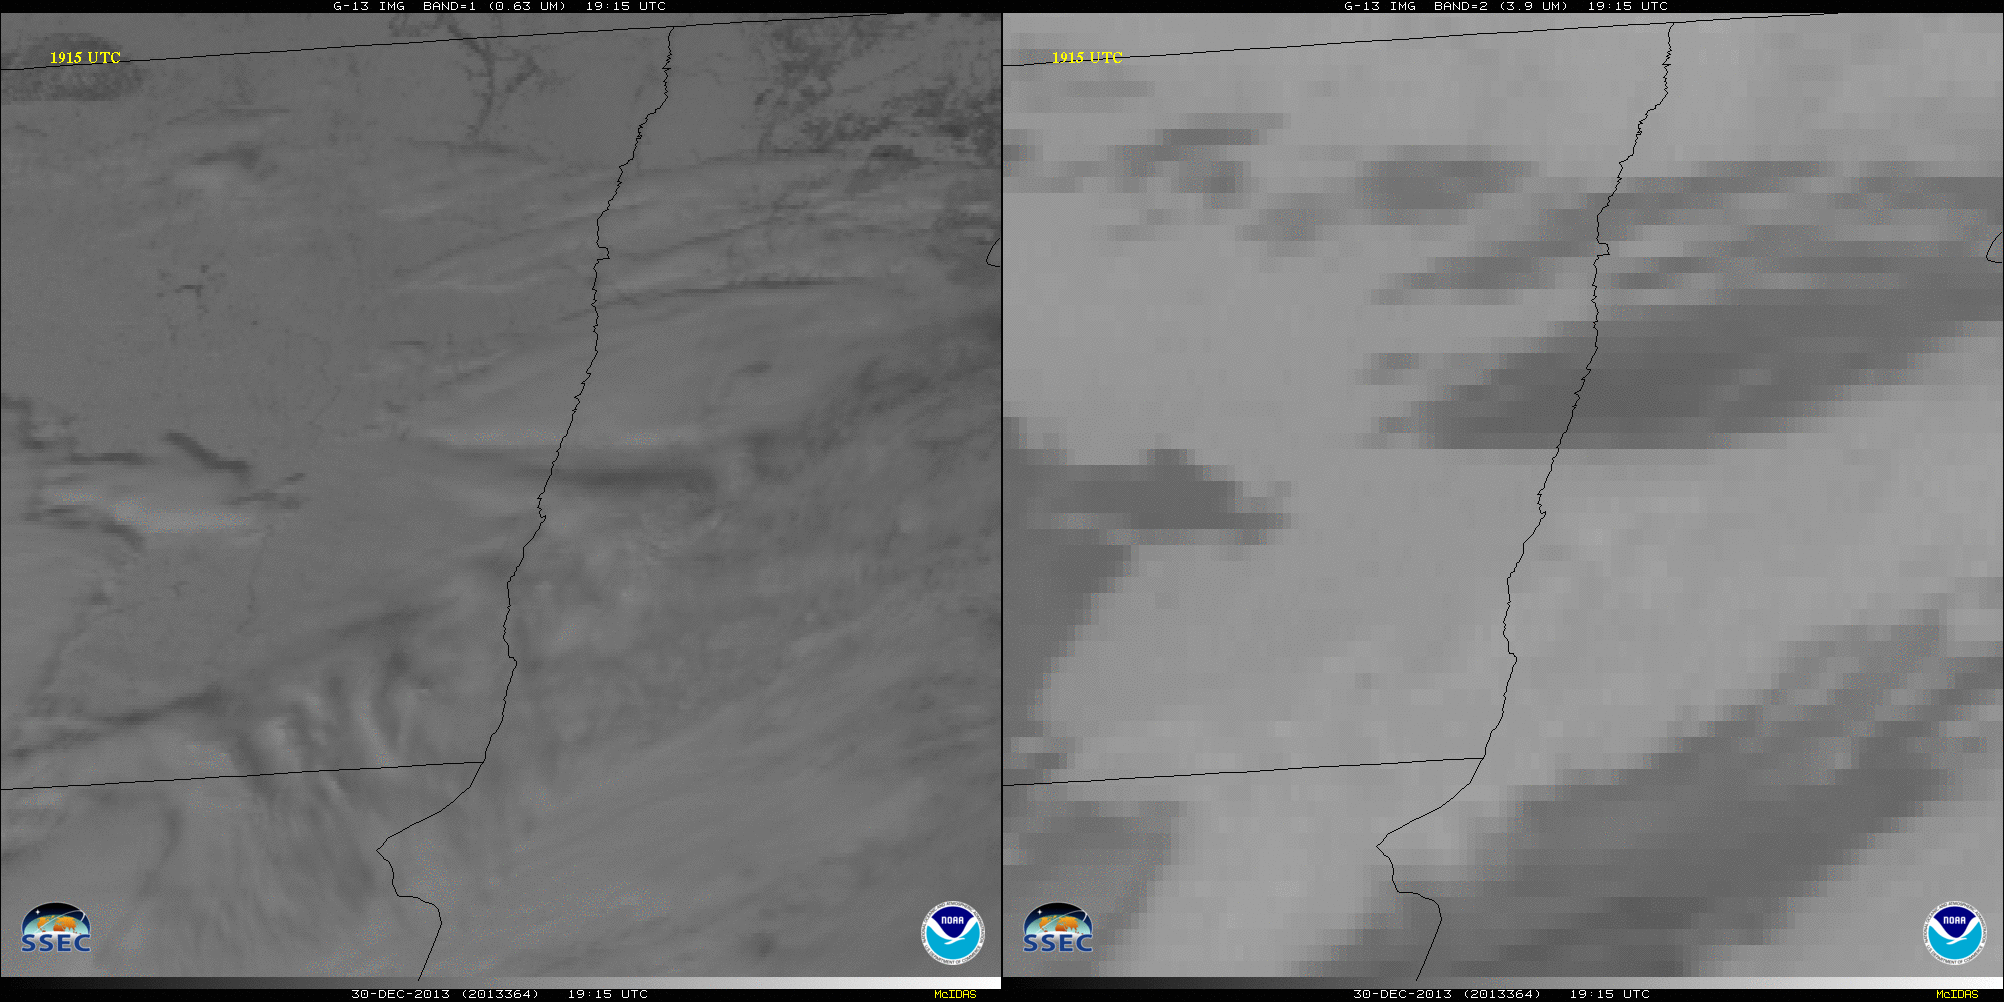 North Dakota crude oil derailment from GOES-13. Smoke plume/visible on left, fire/infrared on right.